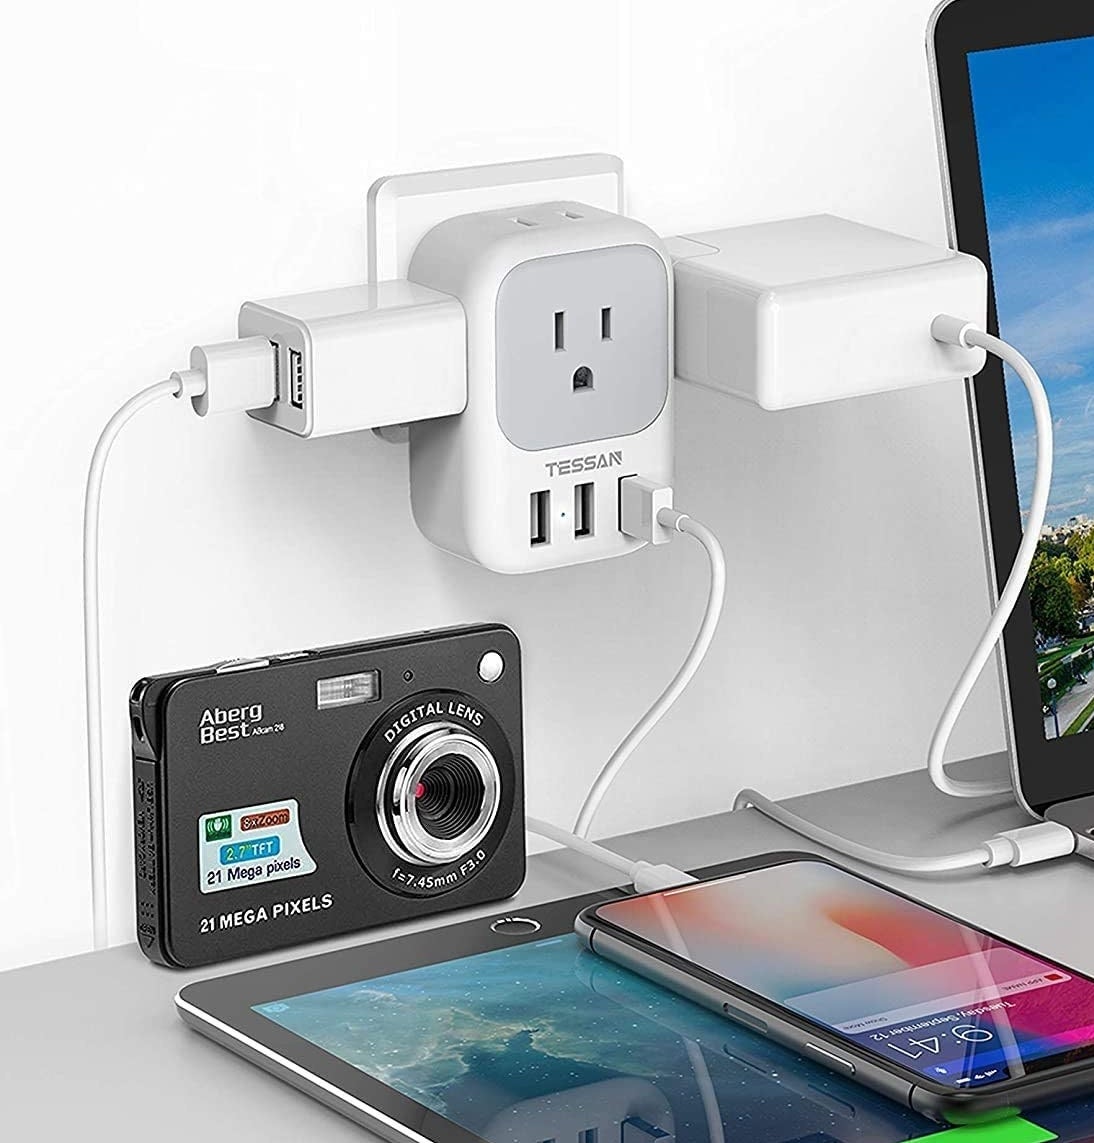 A camera, phone, tablet, and computer plugged into the outlet extender